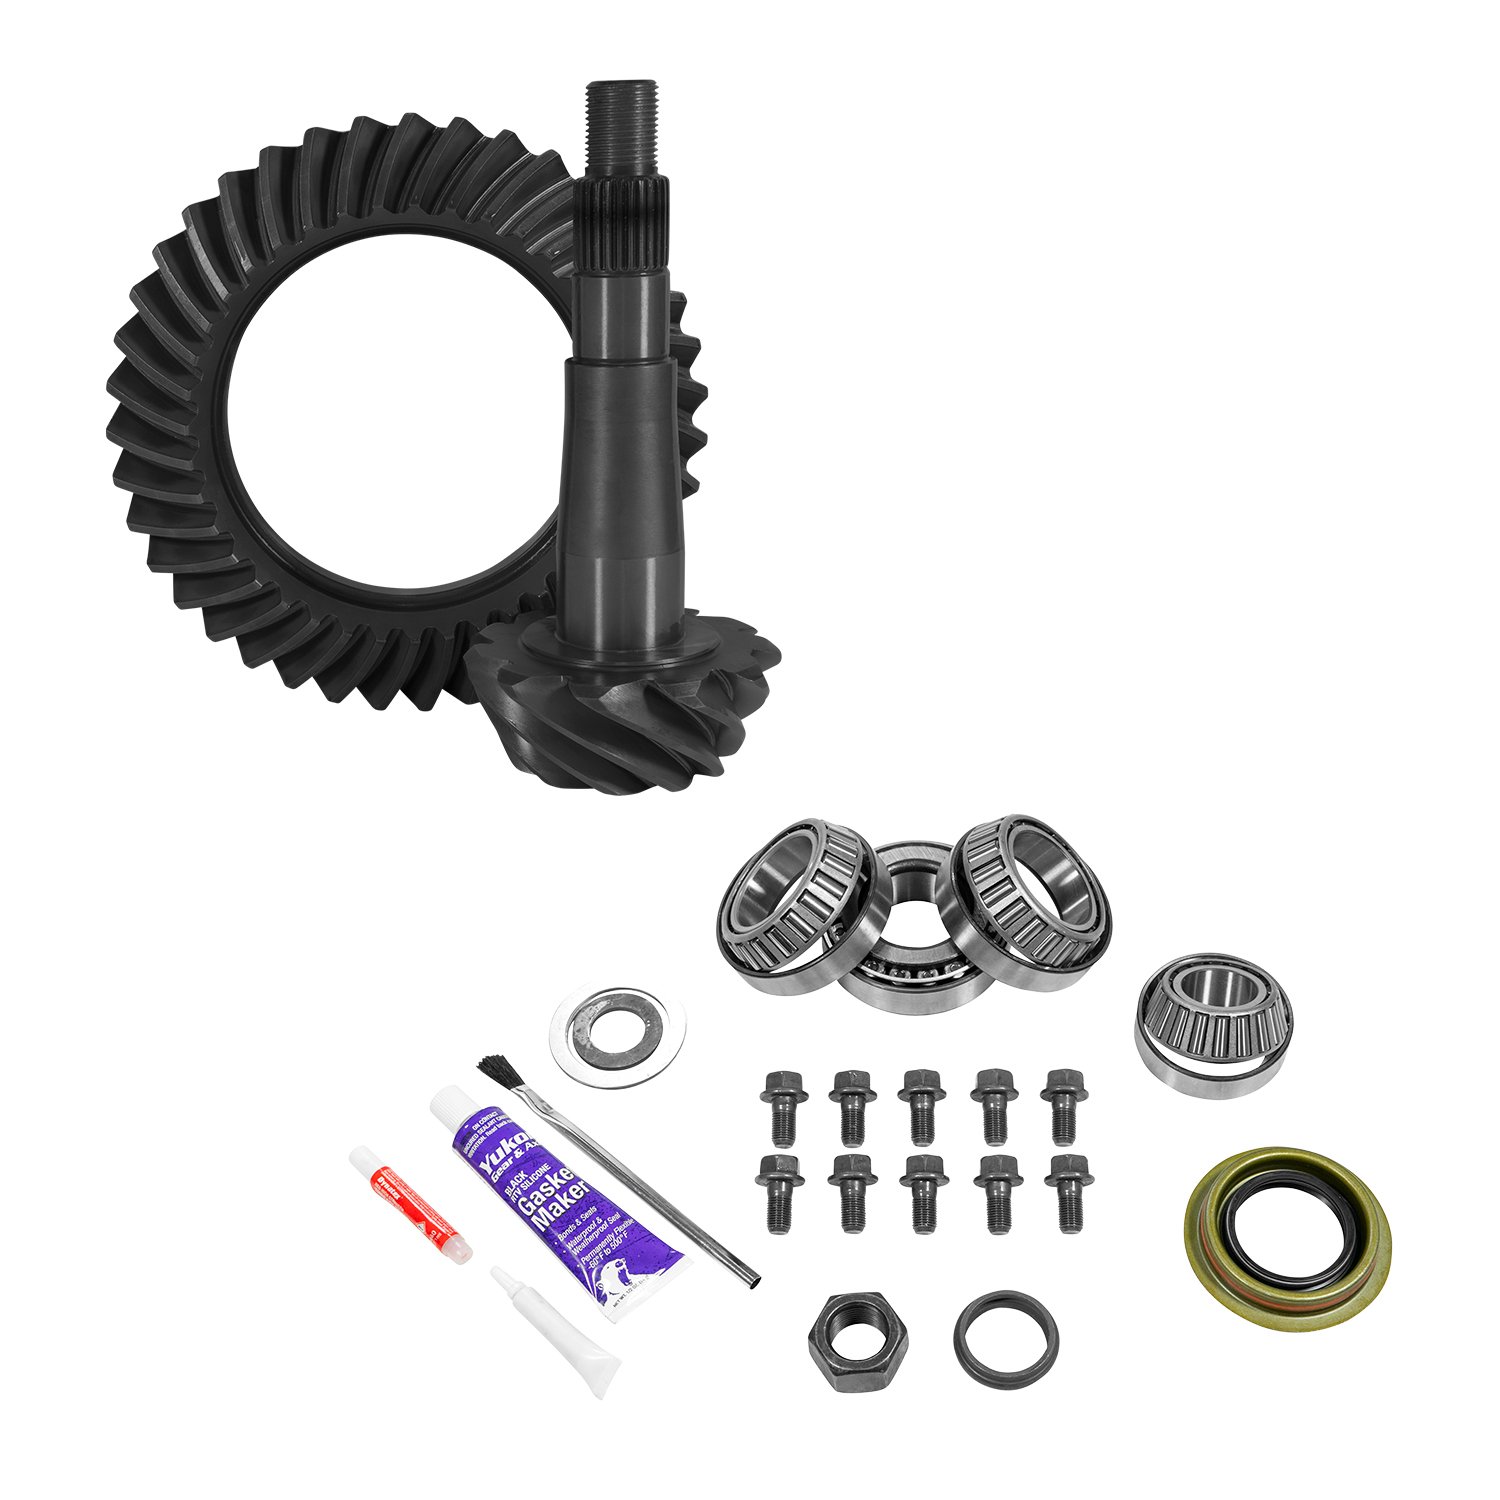 USA Standard 10657 8.25 in./ 213Mm Chy 3.91 Rear Ring & Pinion And Install Kit